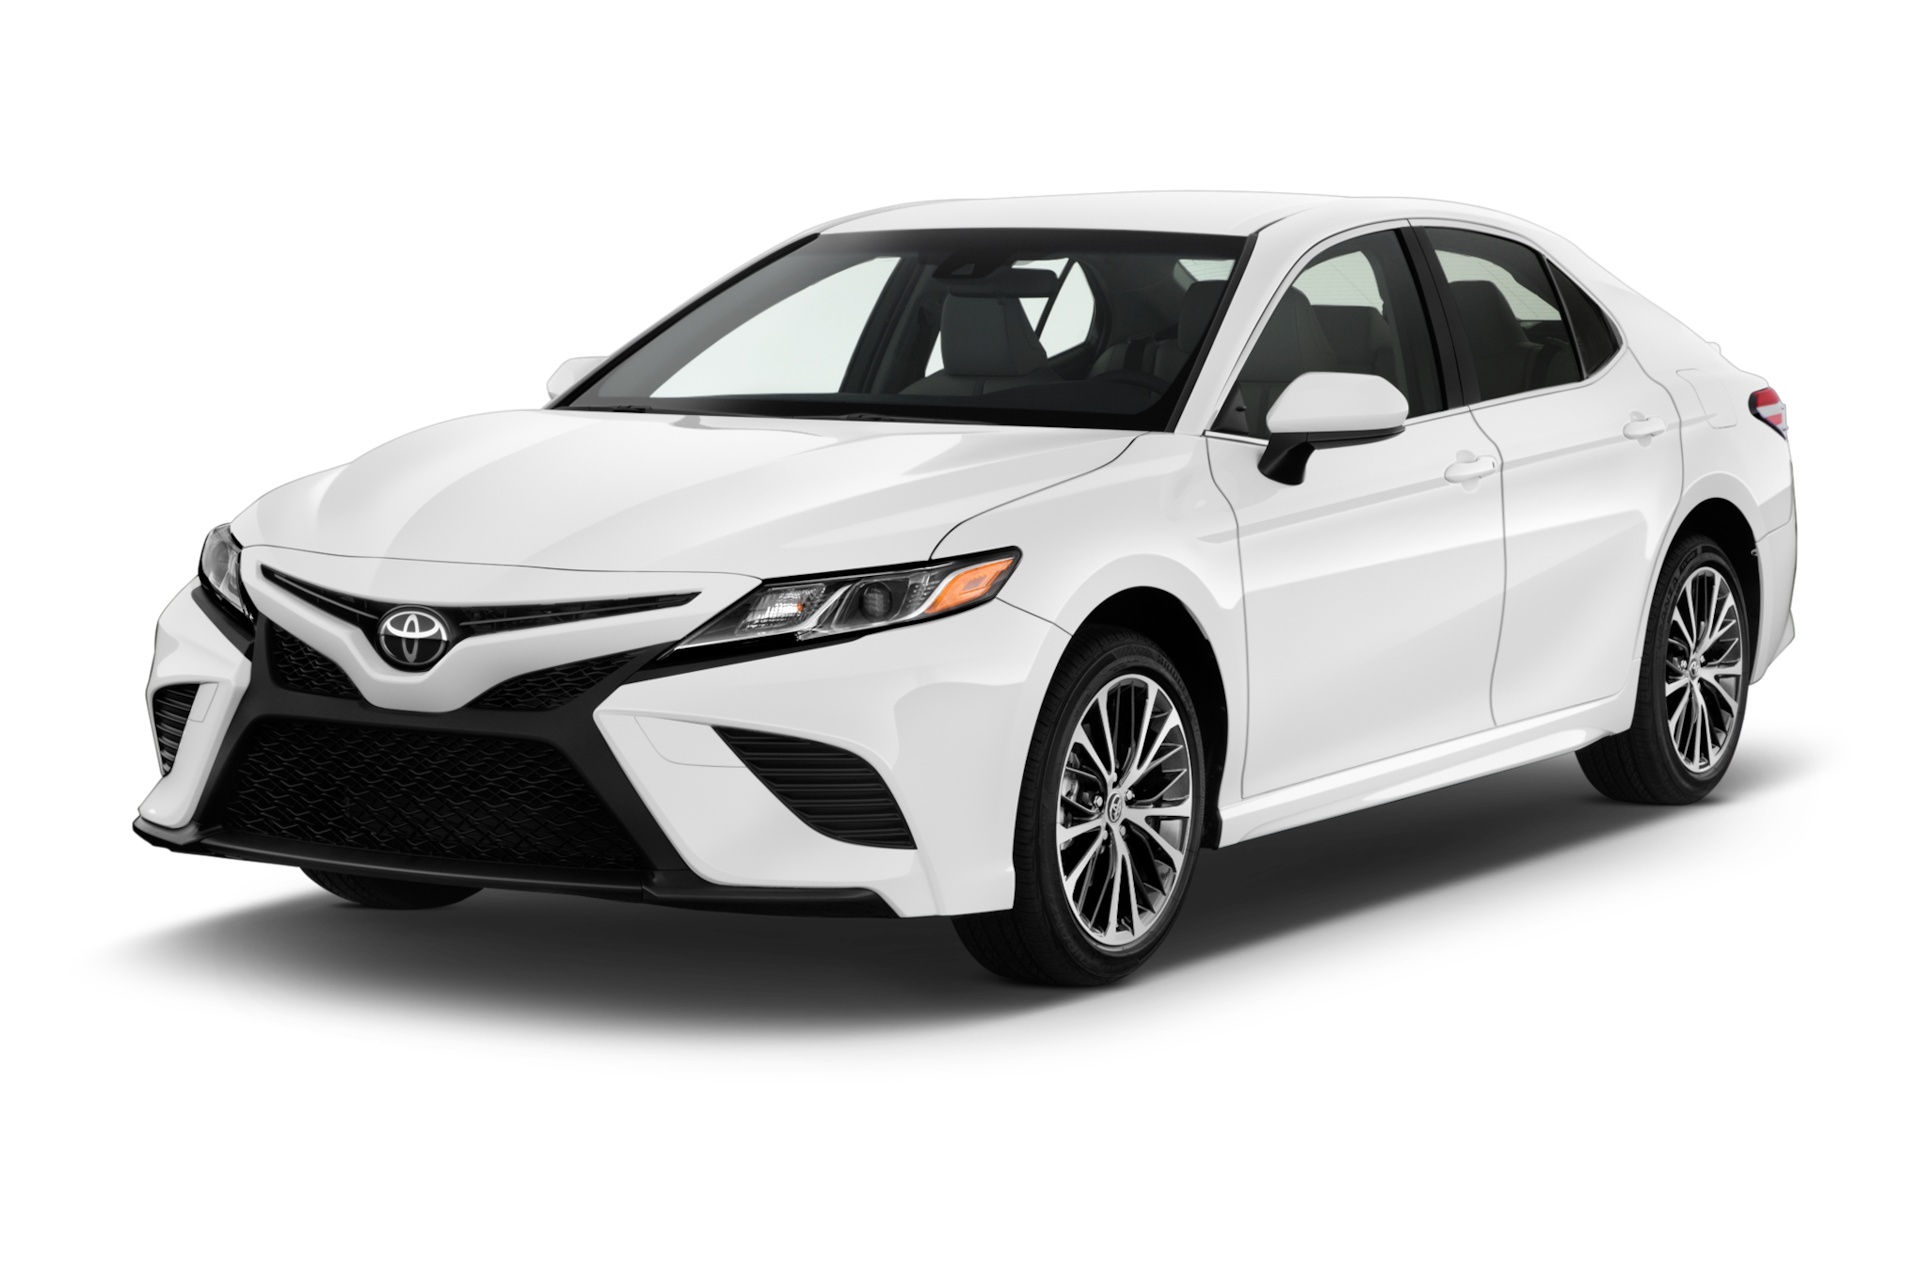 2019 Toyota Camry Prices, Reviews, and Photos - MotorTrend